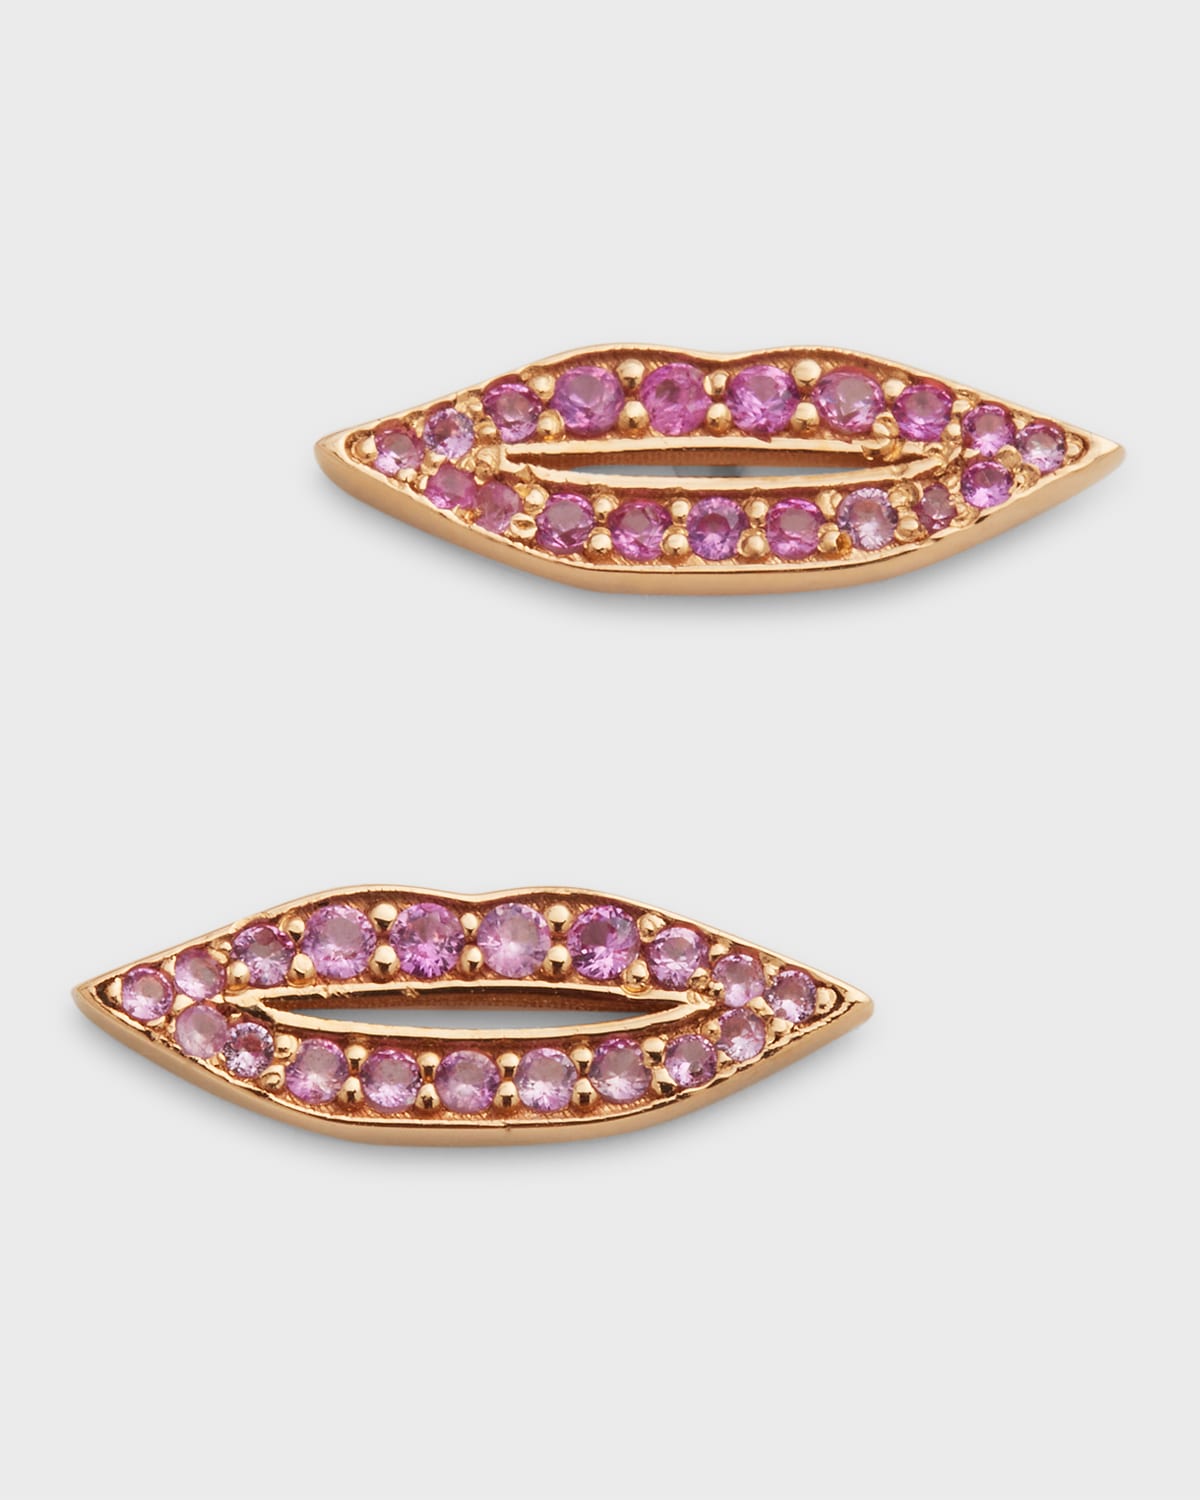 GINETTE NY Pink Sapphire French Kiss Stud Earrings